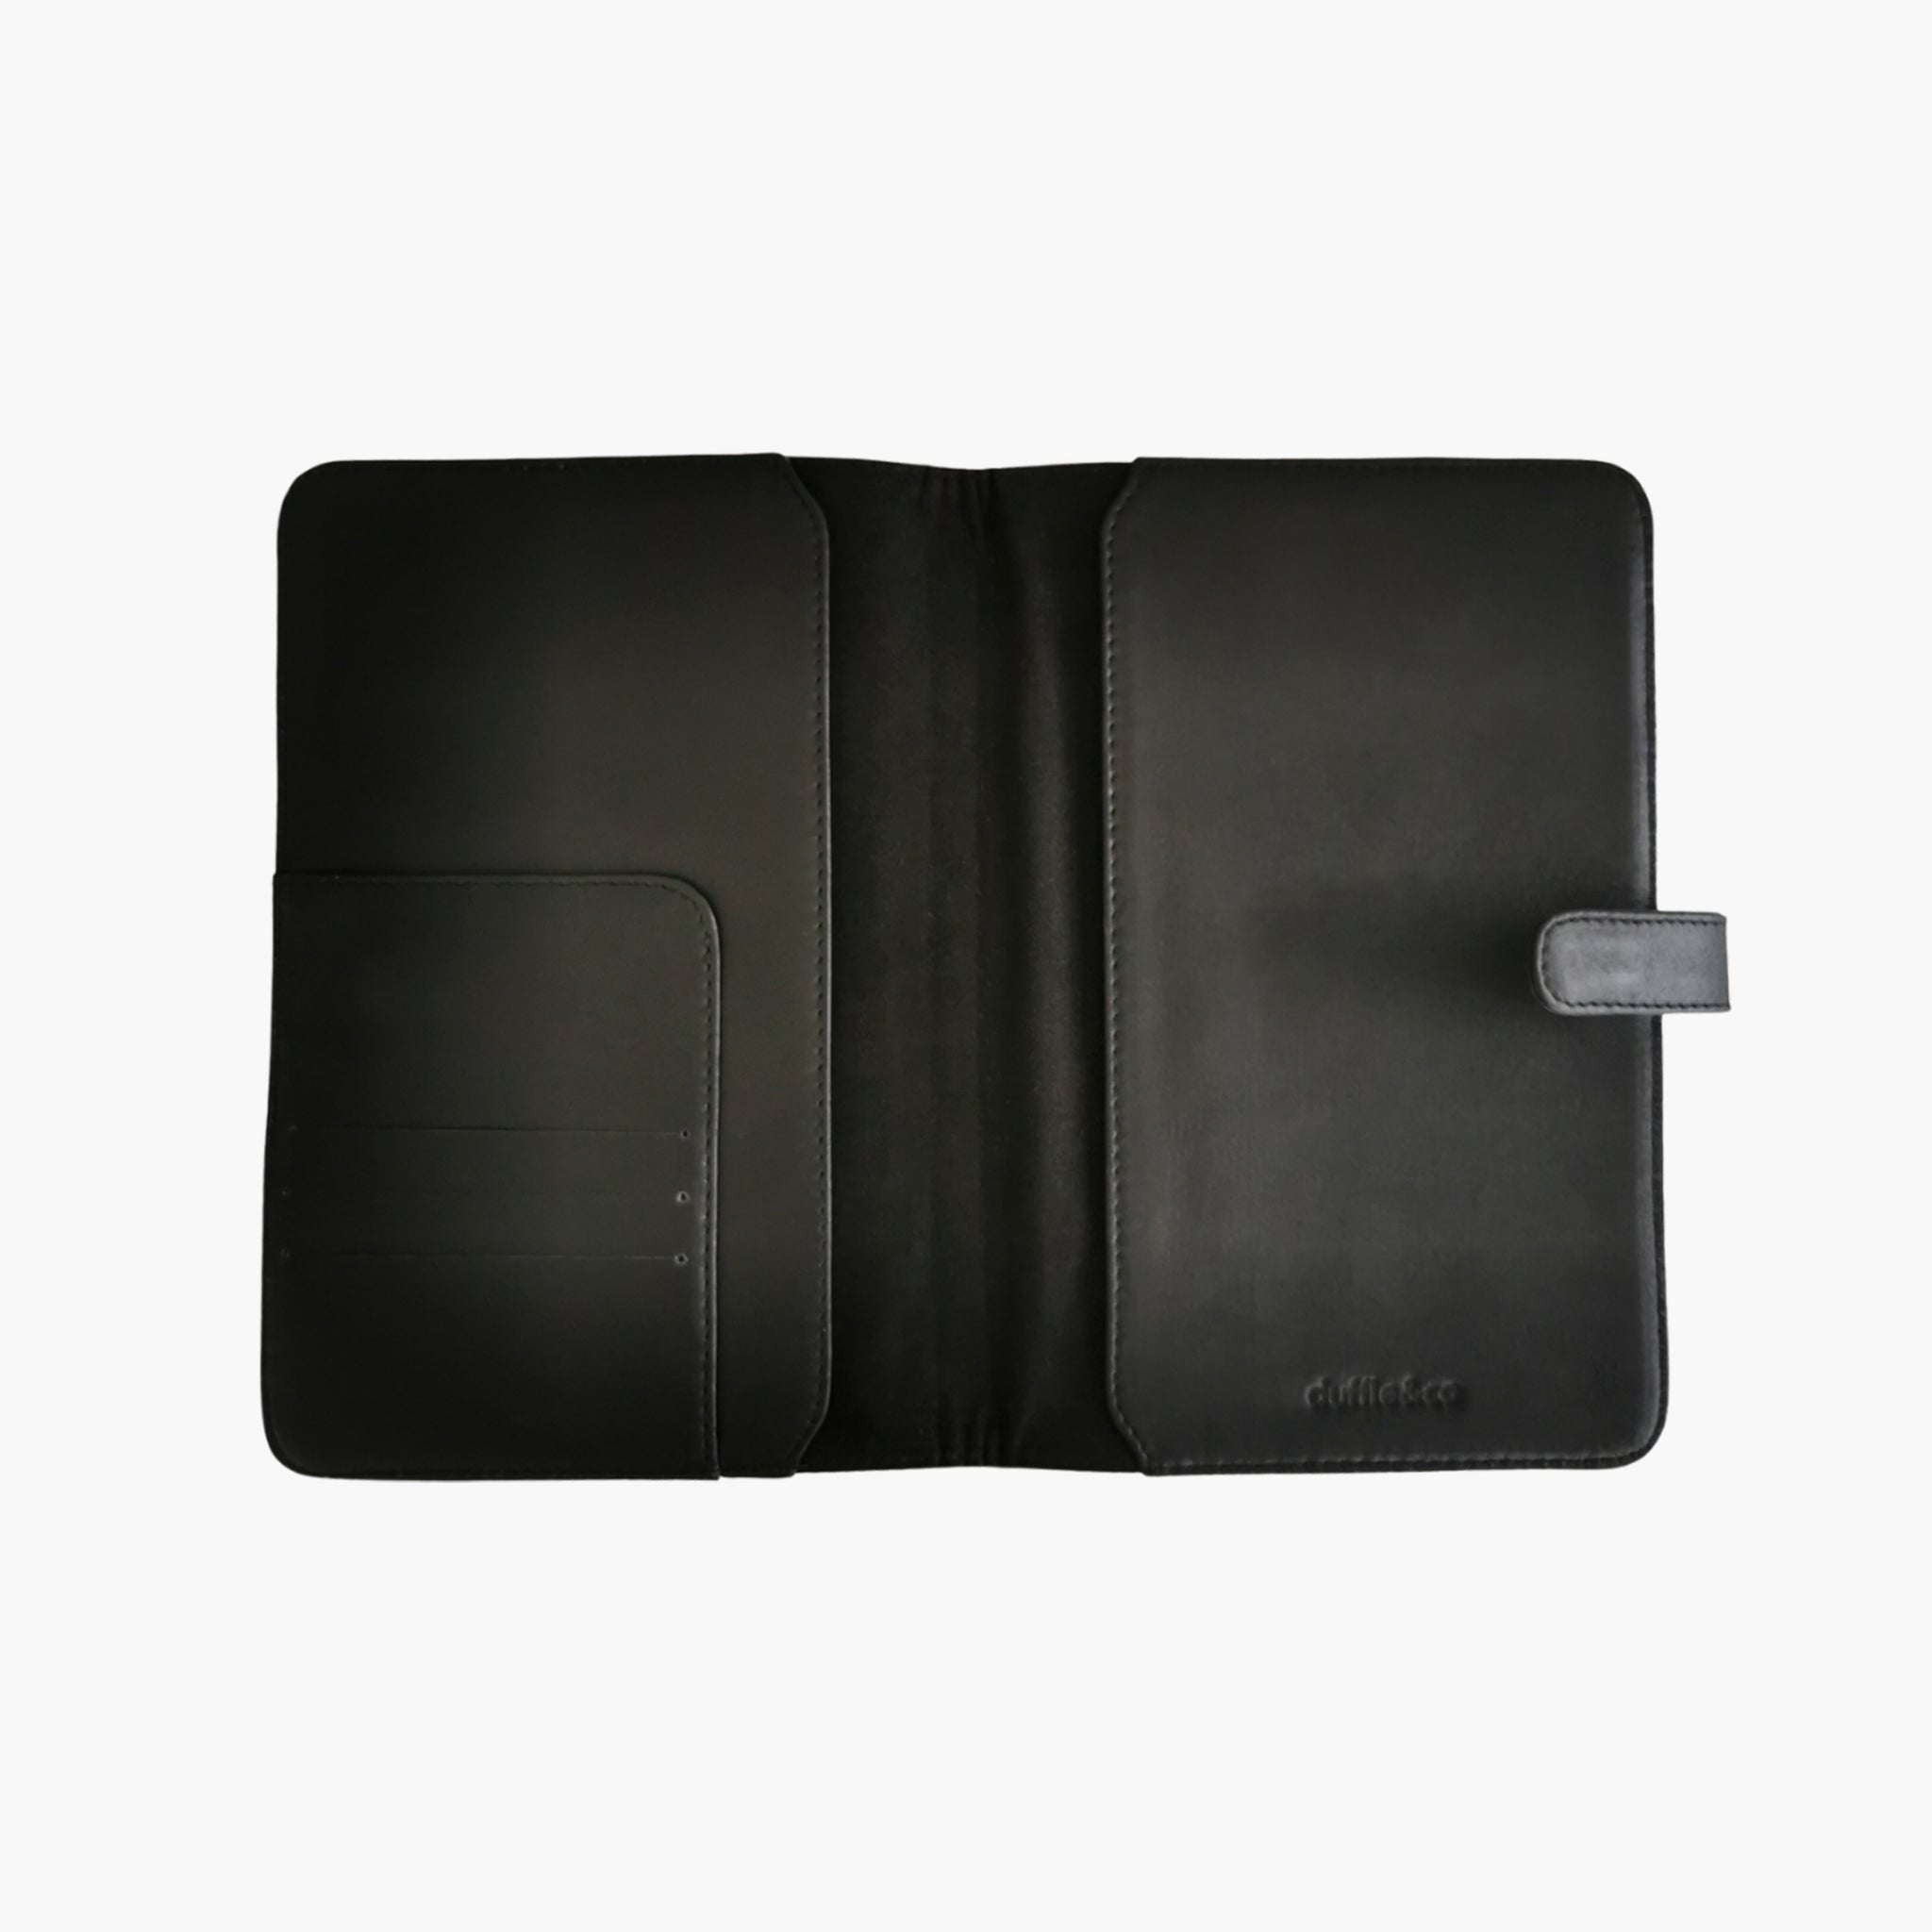 A5 Leather Organiser in Black Interior by Duffle&Co